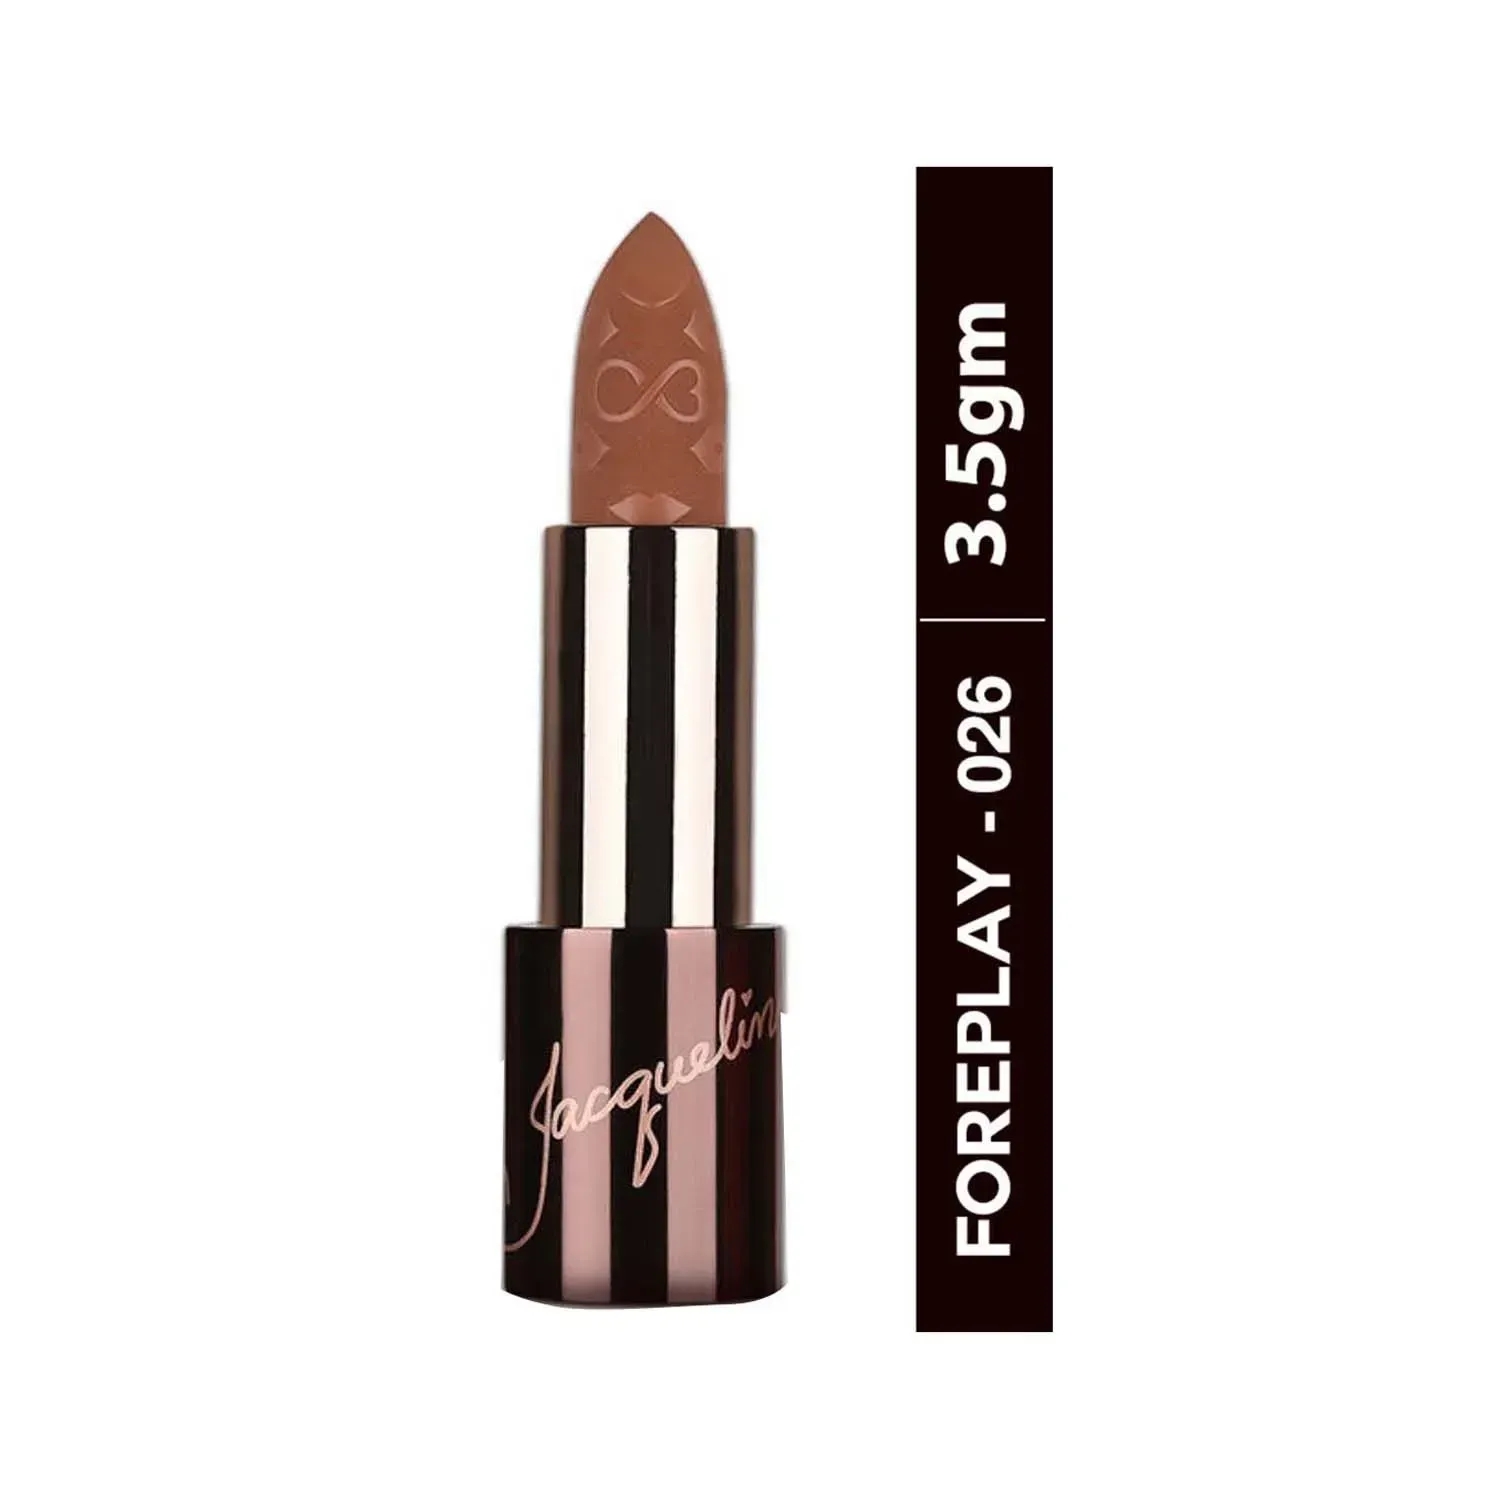 Colorbar X Jacqueline Sinful Matte Lipcolor - 026 Foreplay (3.5g)